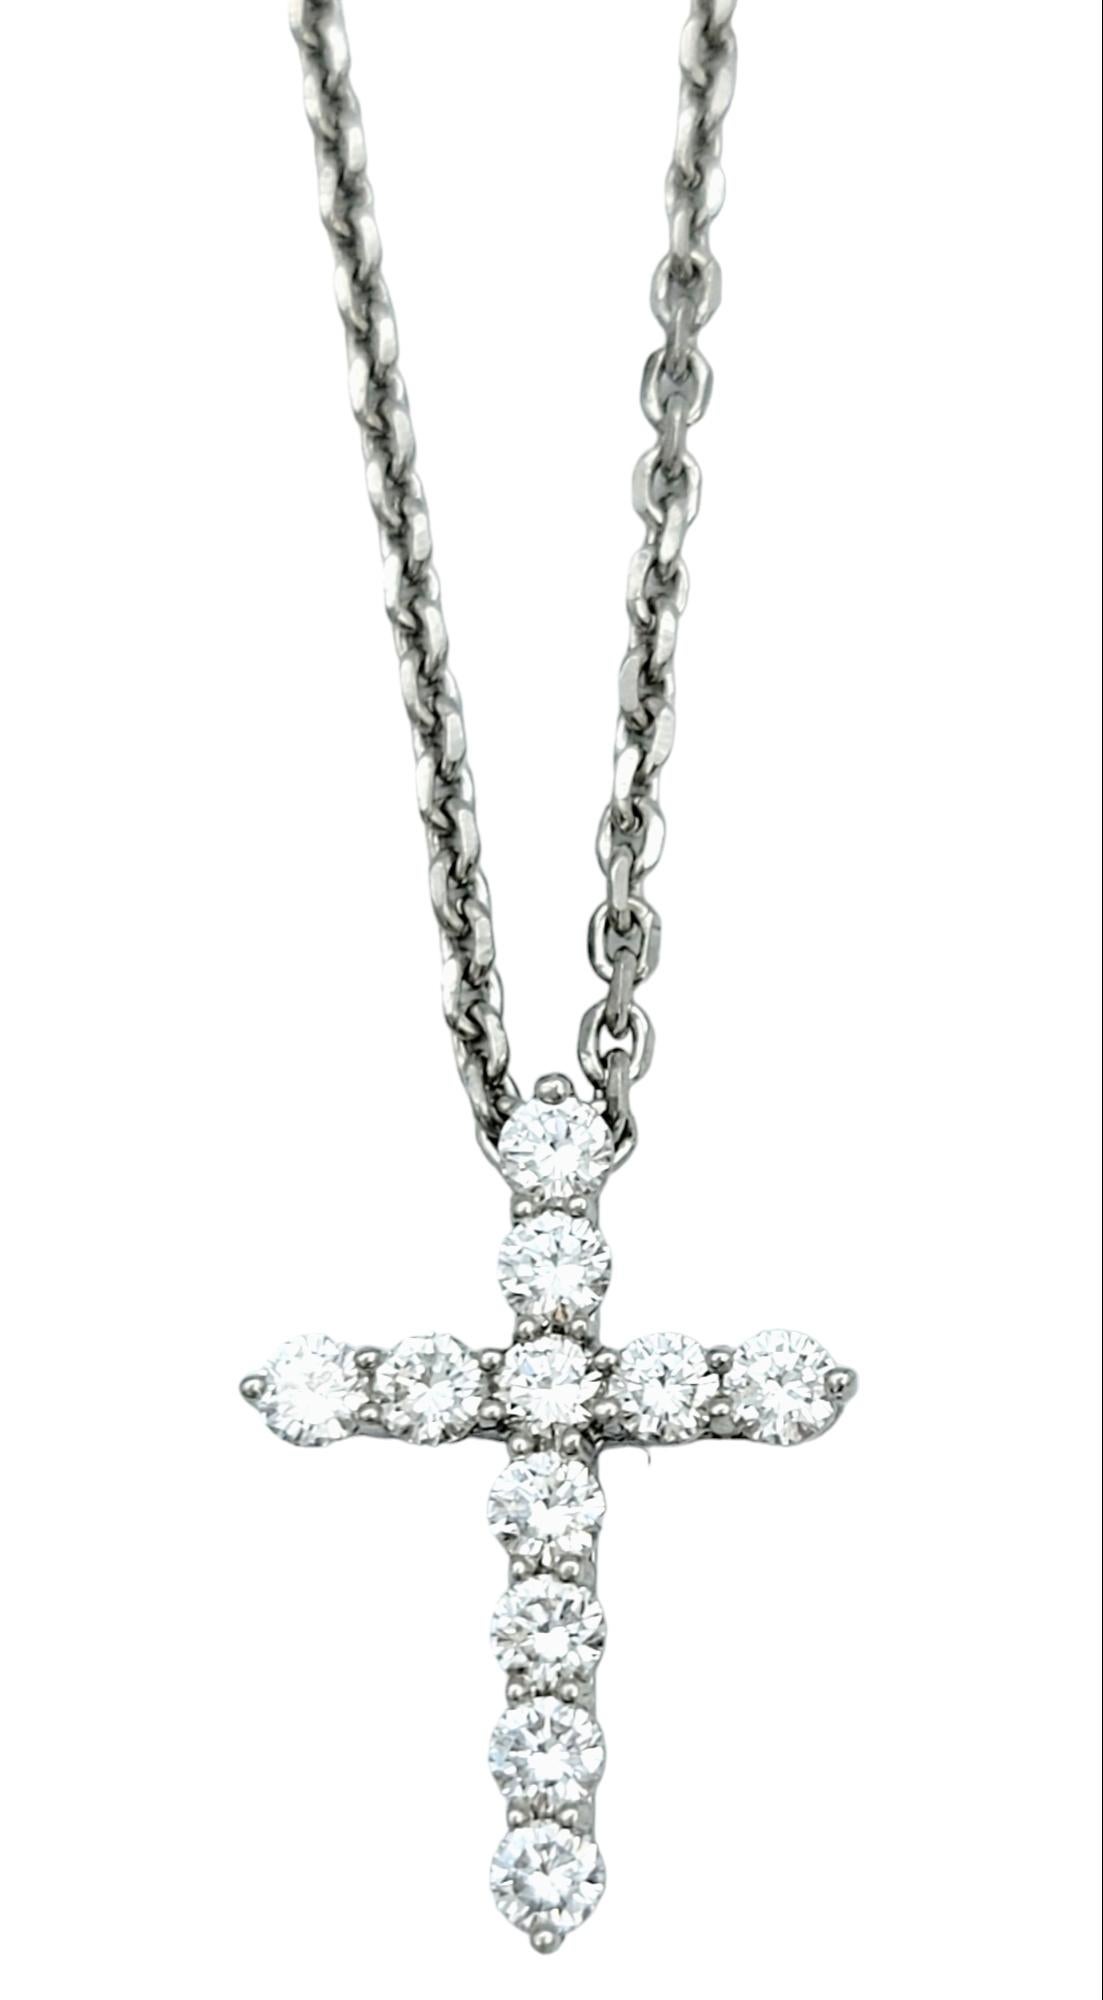 This classically beautiful cross pendant necklace from Tiffany & Co. is the epitome of understated elegance. Founded in 1837 in New York City, Tiffany & Co. is one of the world's most storied luxury design houses recognized globally for its